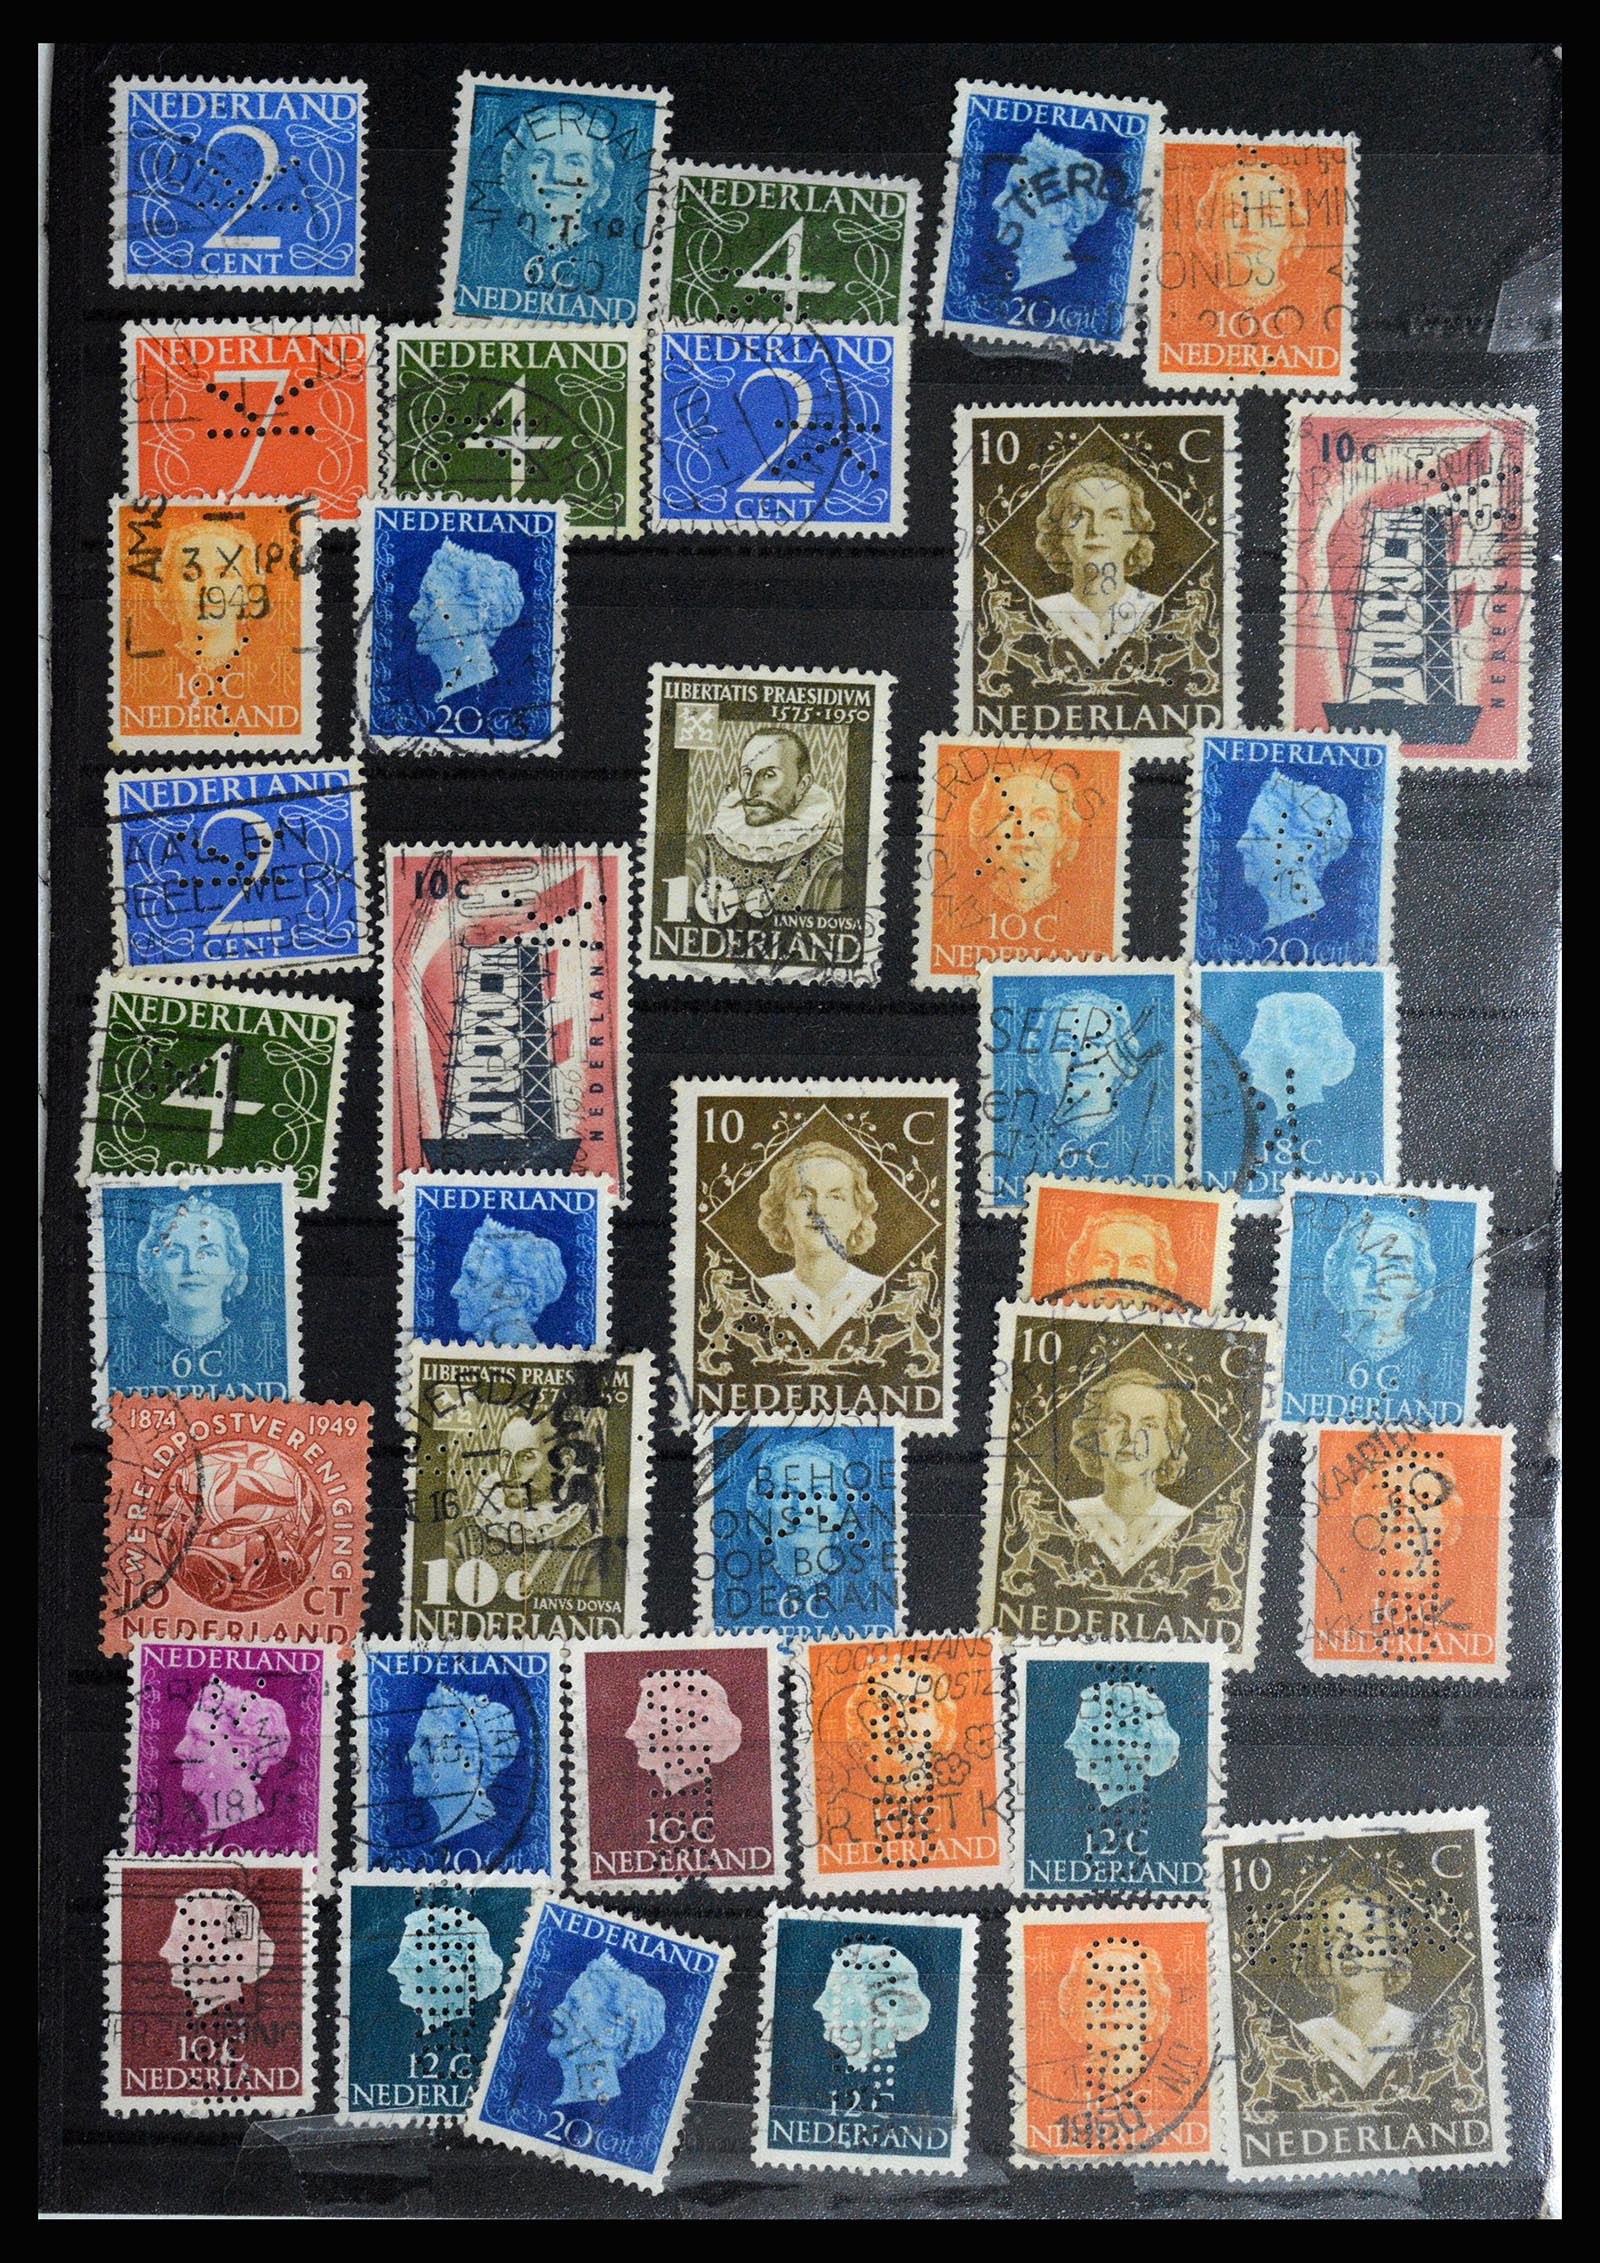 36849 012 - Stamp collection 36849 Netherlands perfins 1891-1960.